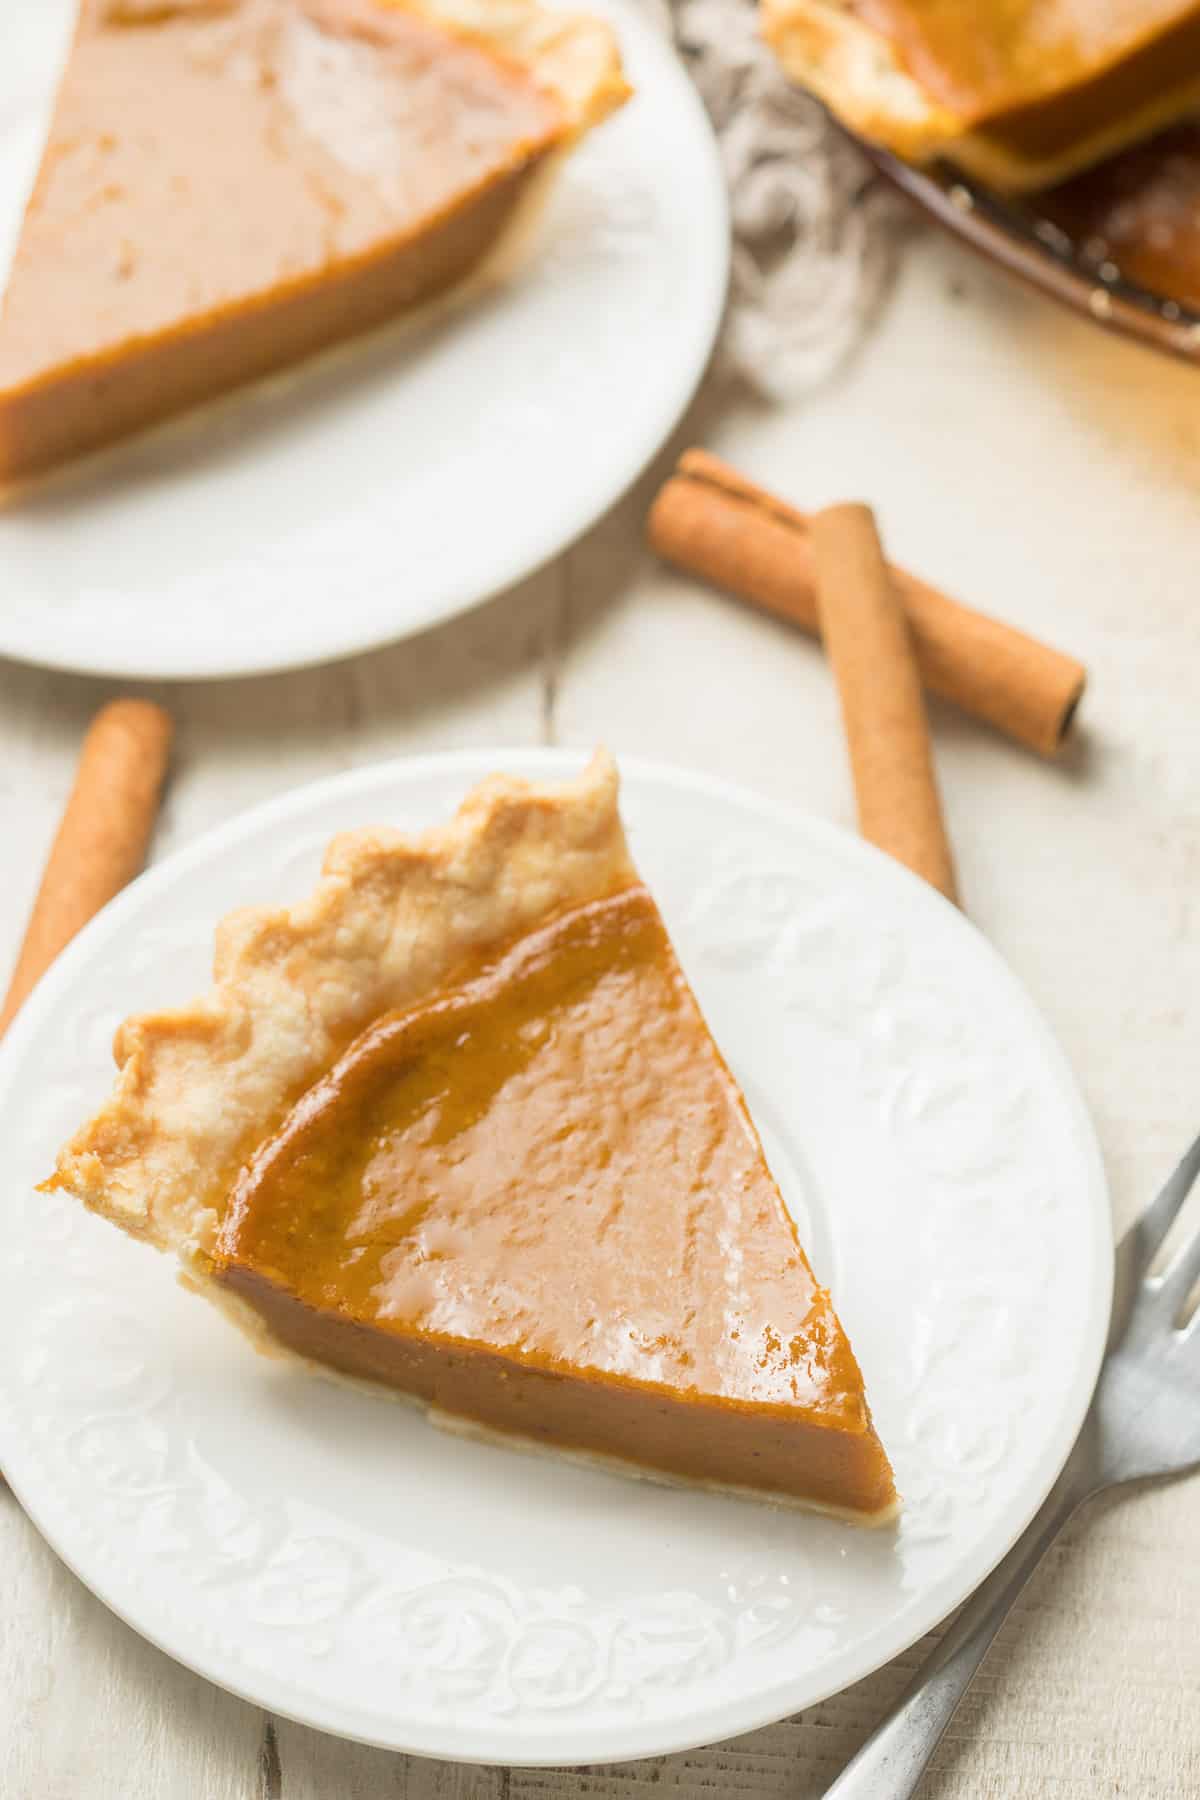 Two plates of Vegan Pumpkin Pie slices without toppings.